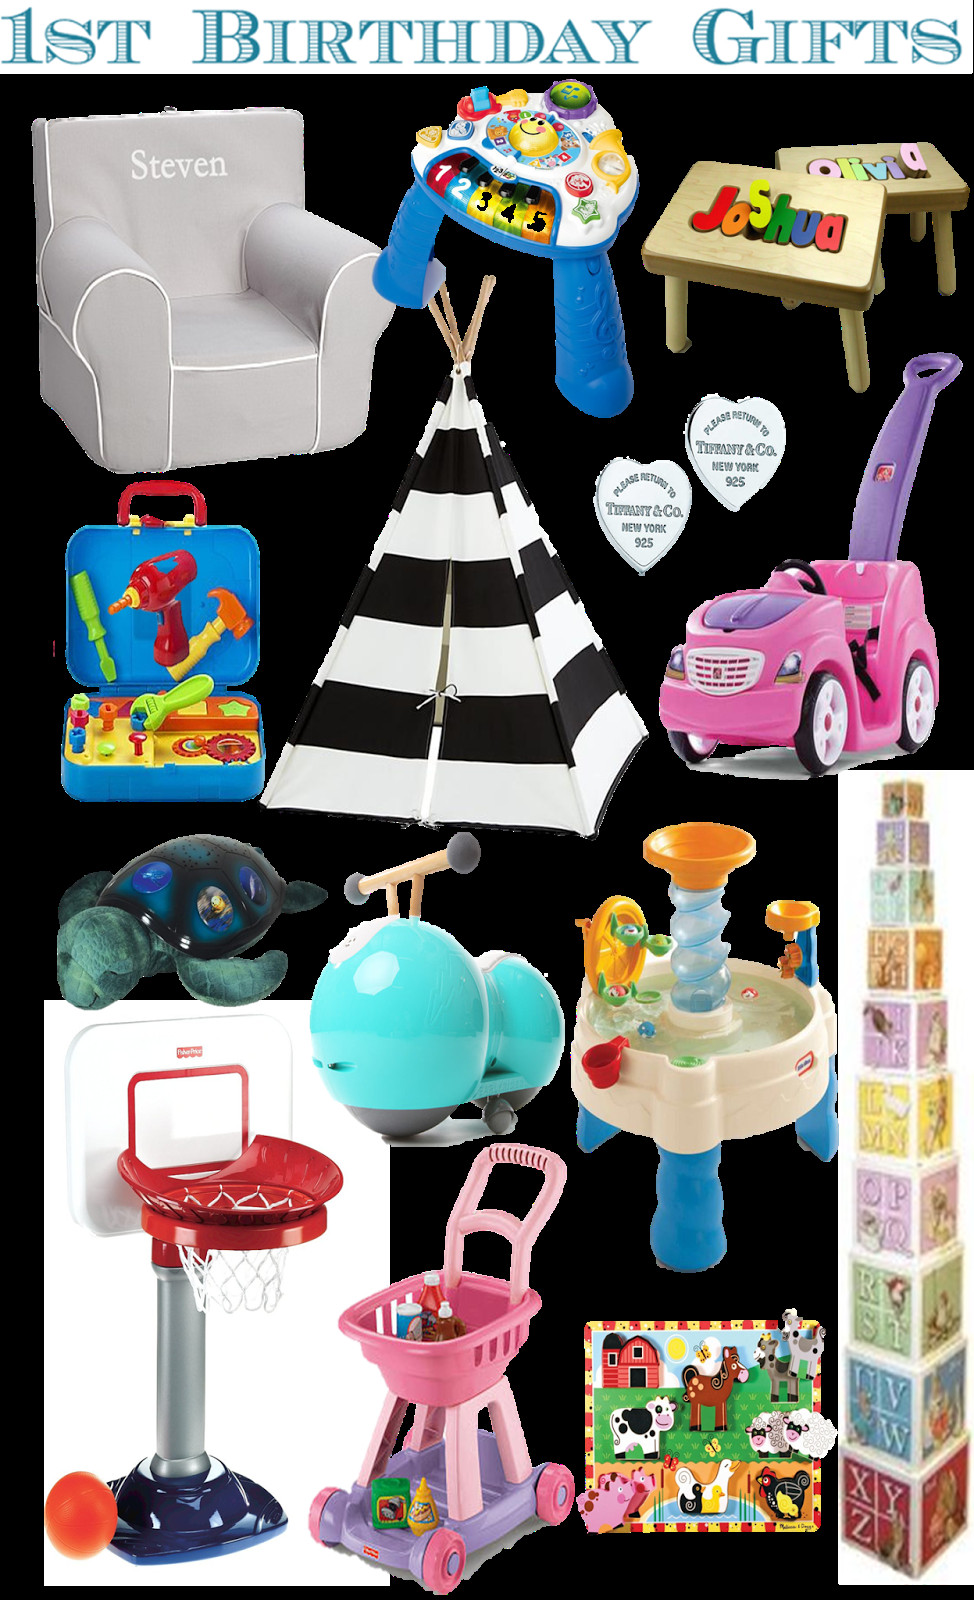 1st Birthday Gifts For Girl
 rnlMusings Gift Guide 1st Birthday Gifts